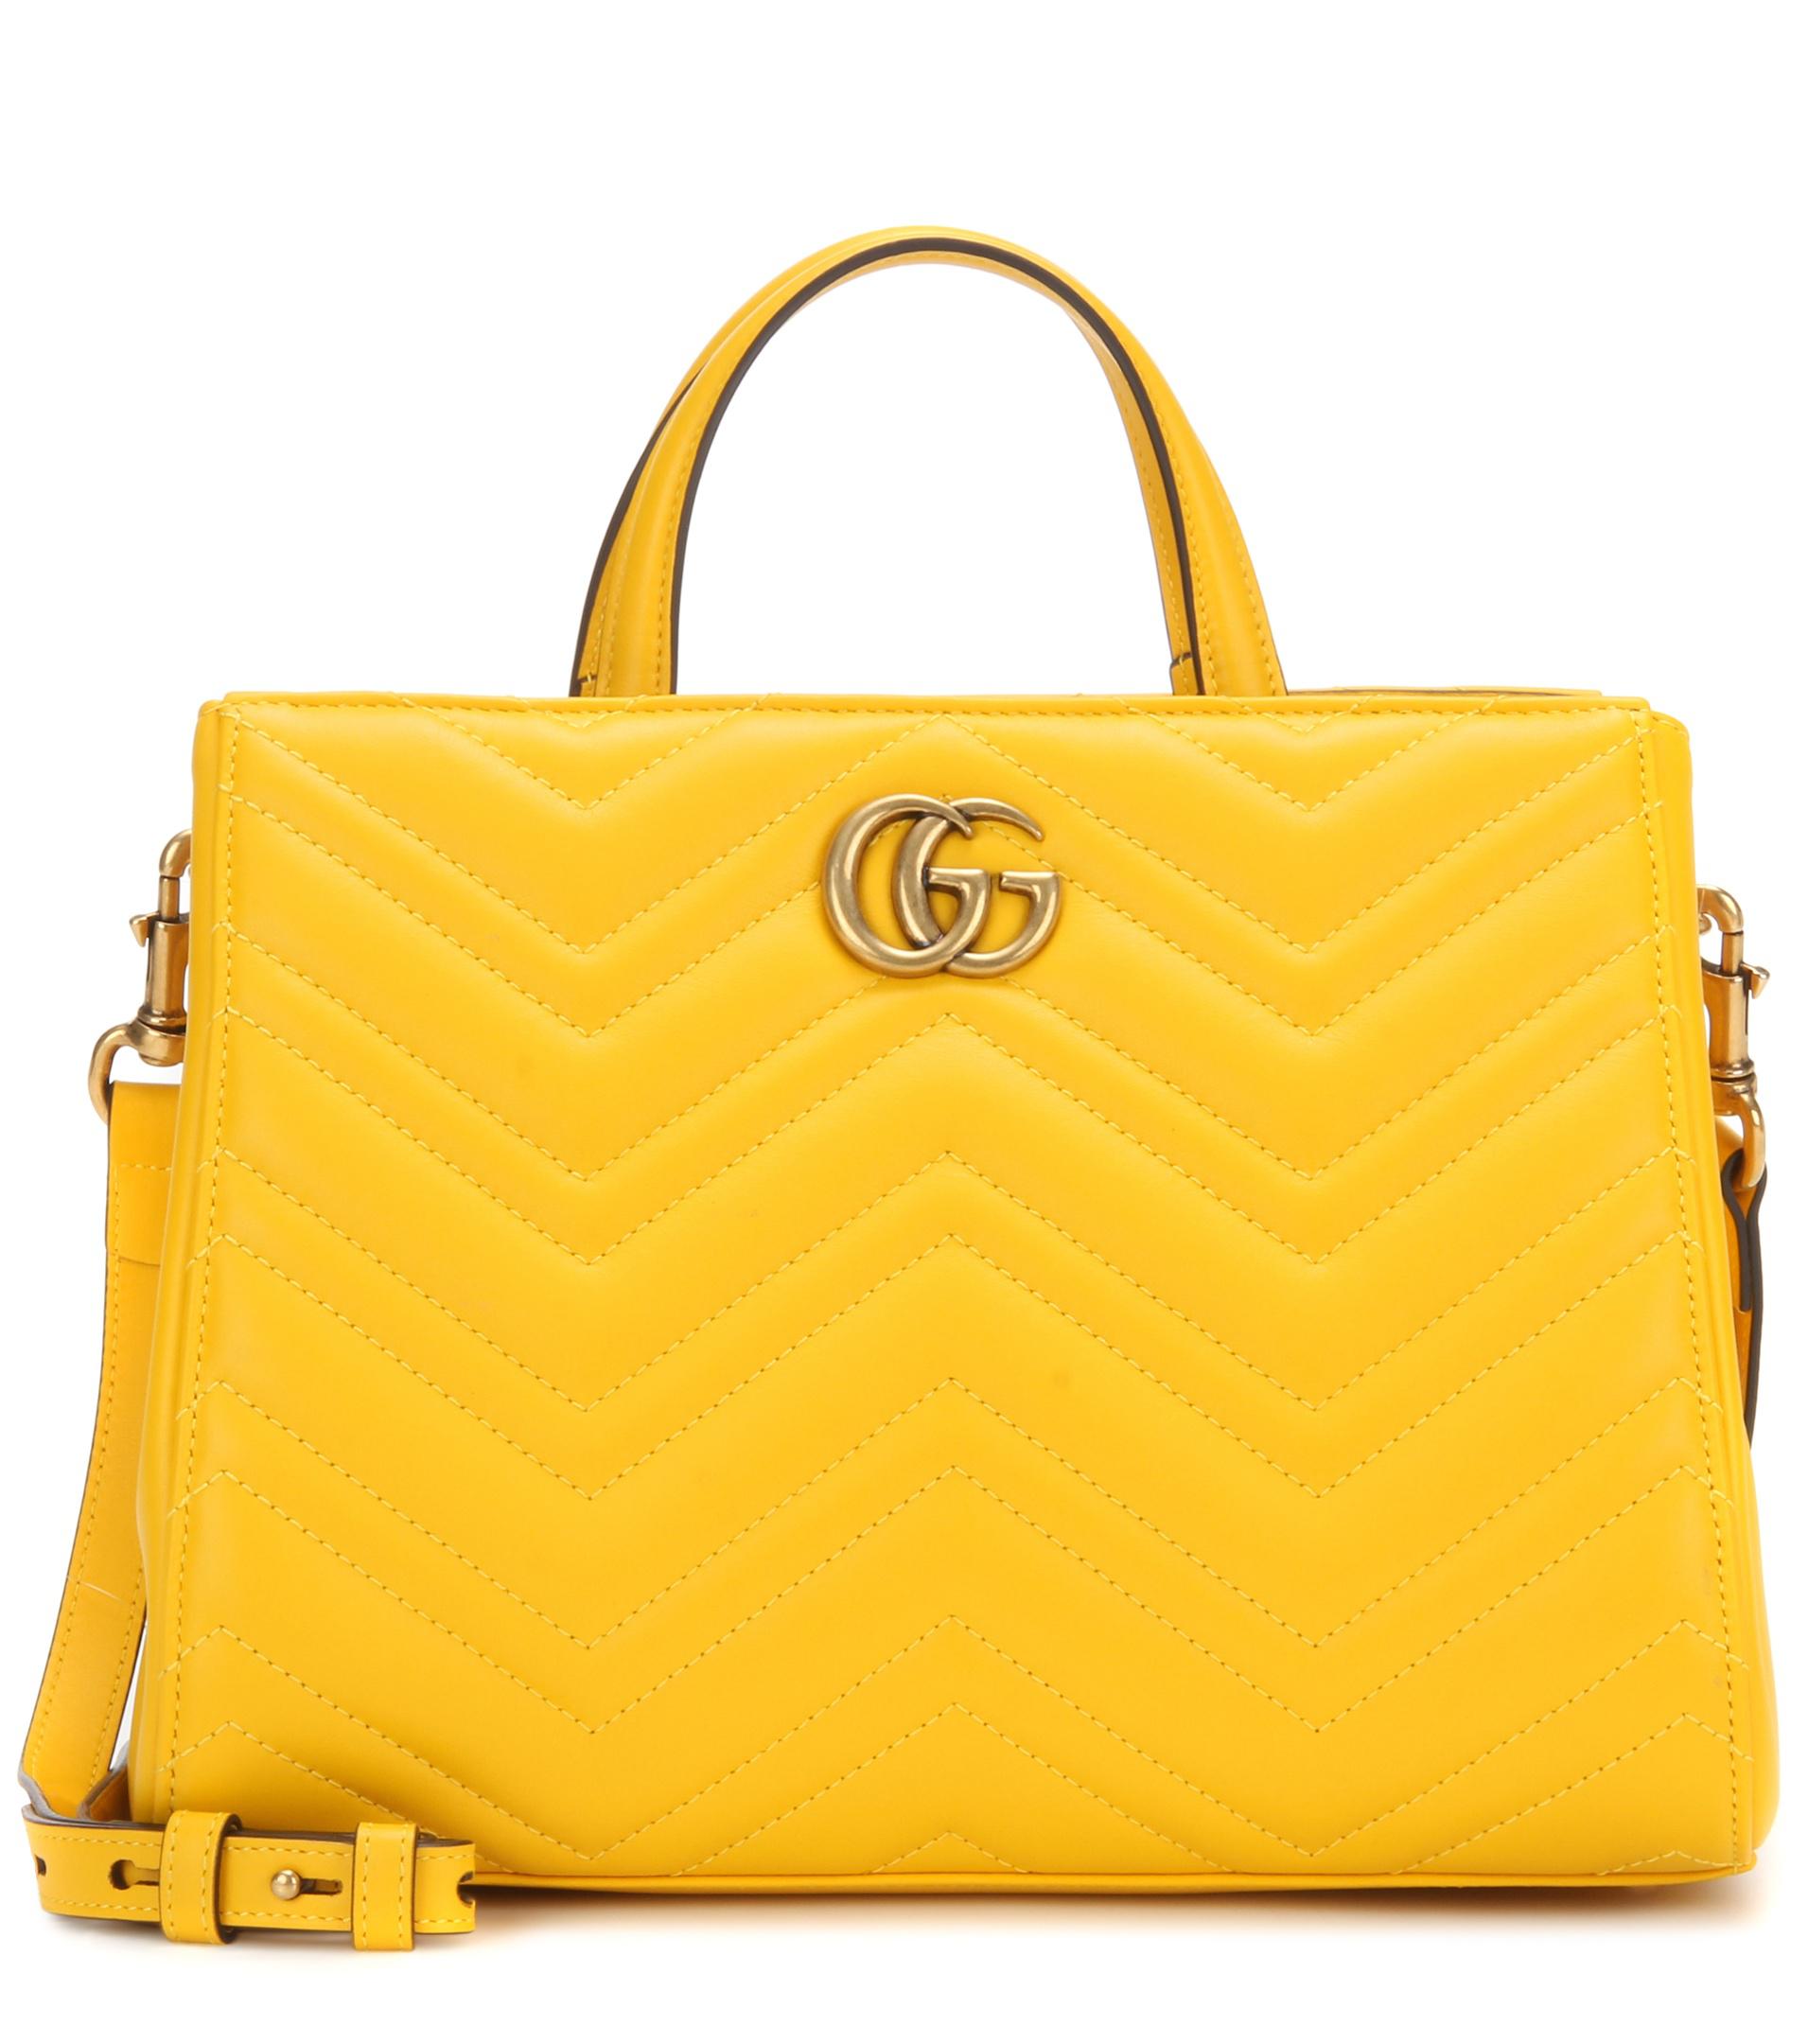 Gucci Gg Marmont Small Matelassé Leather Tote in Yellow - Lyst